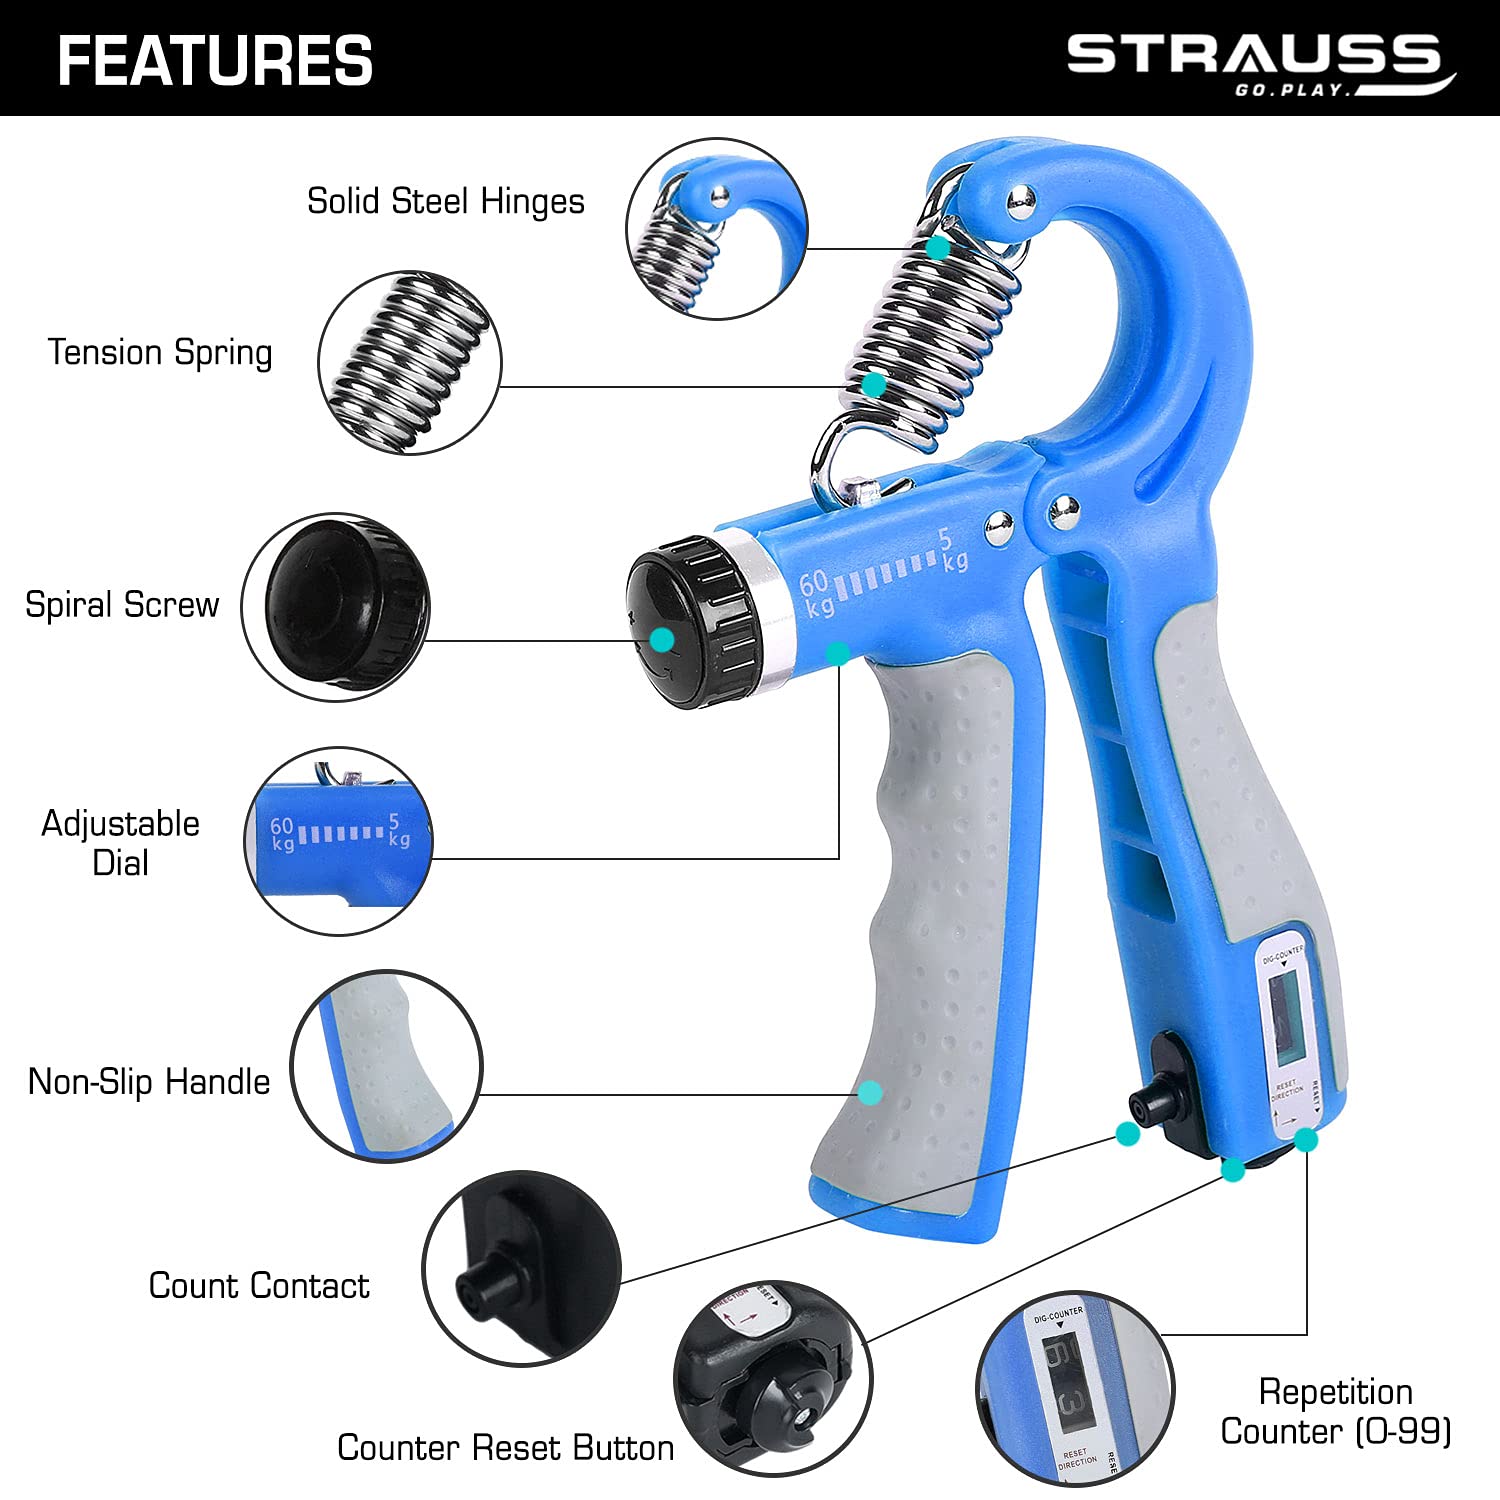 Strauss Adjustable Hand Grip with Smart Counter | Adjustable Resistance (10KG - 60KG) | Hand/Power Gripper for Home & Gym Workouts | Perfect for Finger & Forearm Hand Exercises & Strength Building for Men & Women (Blue)